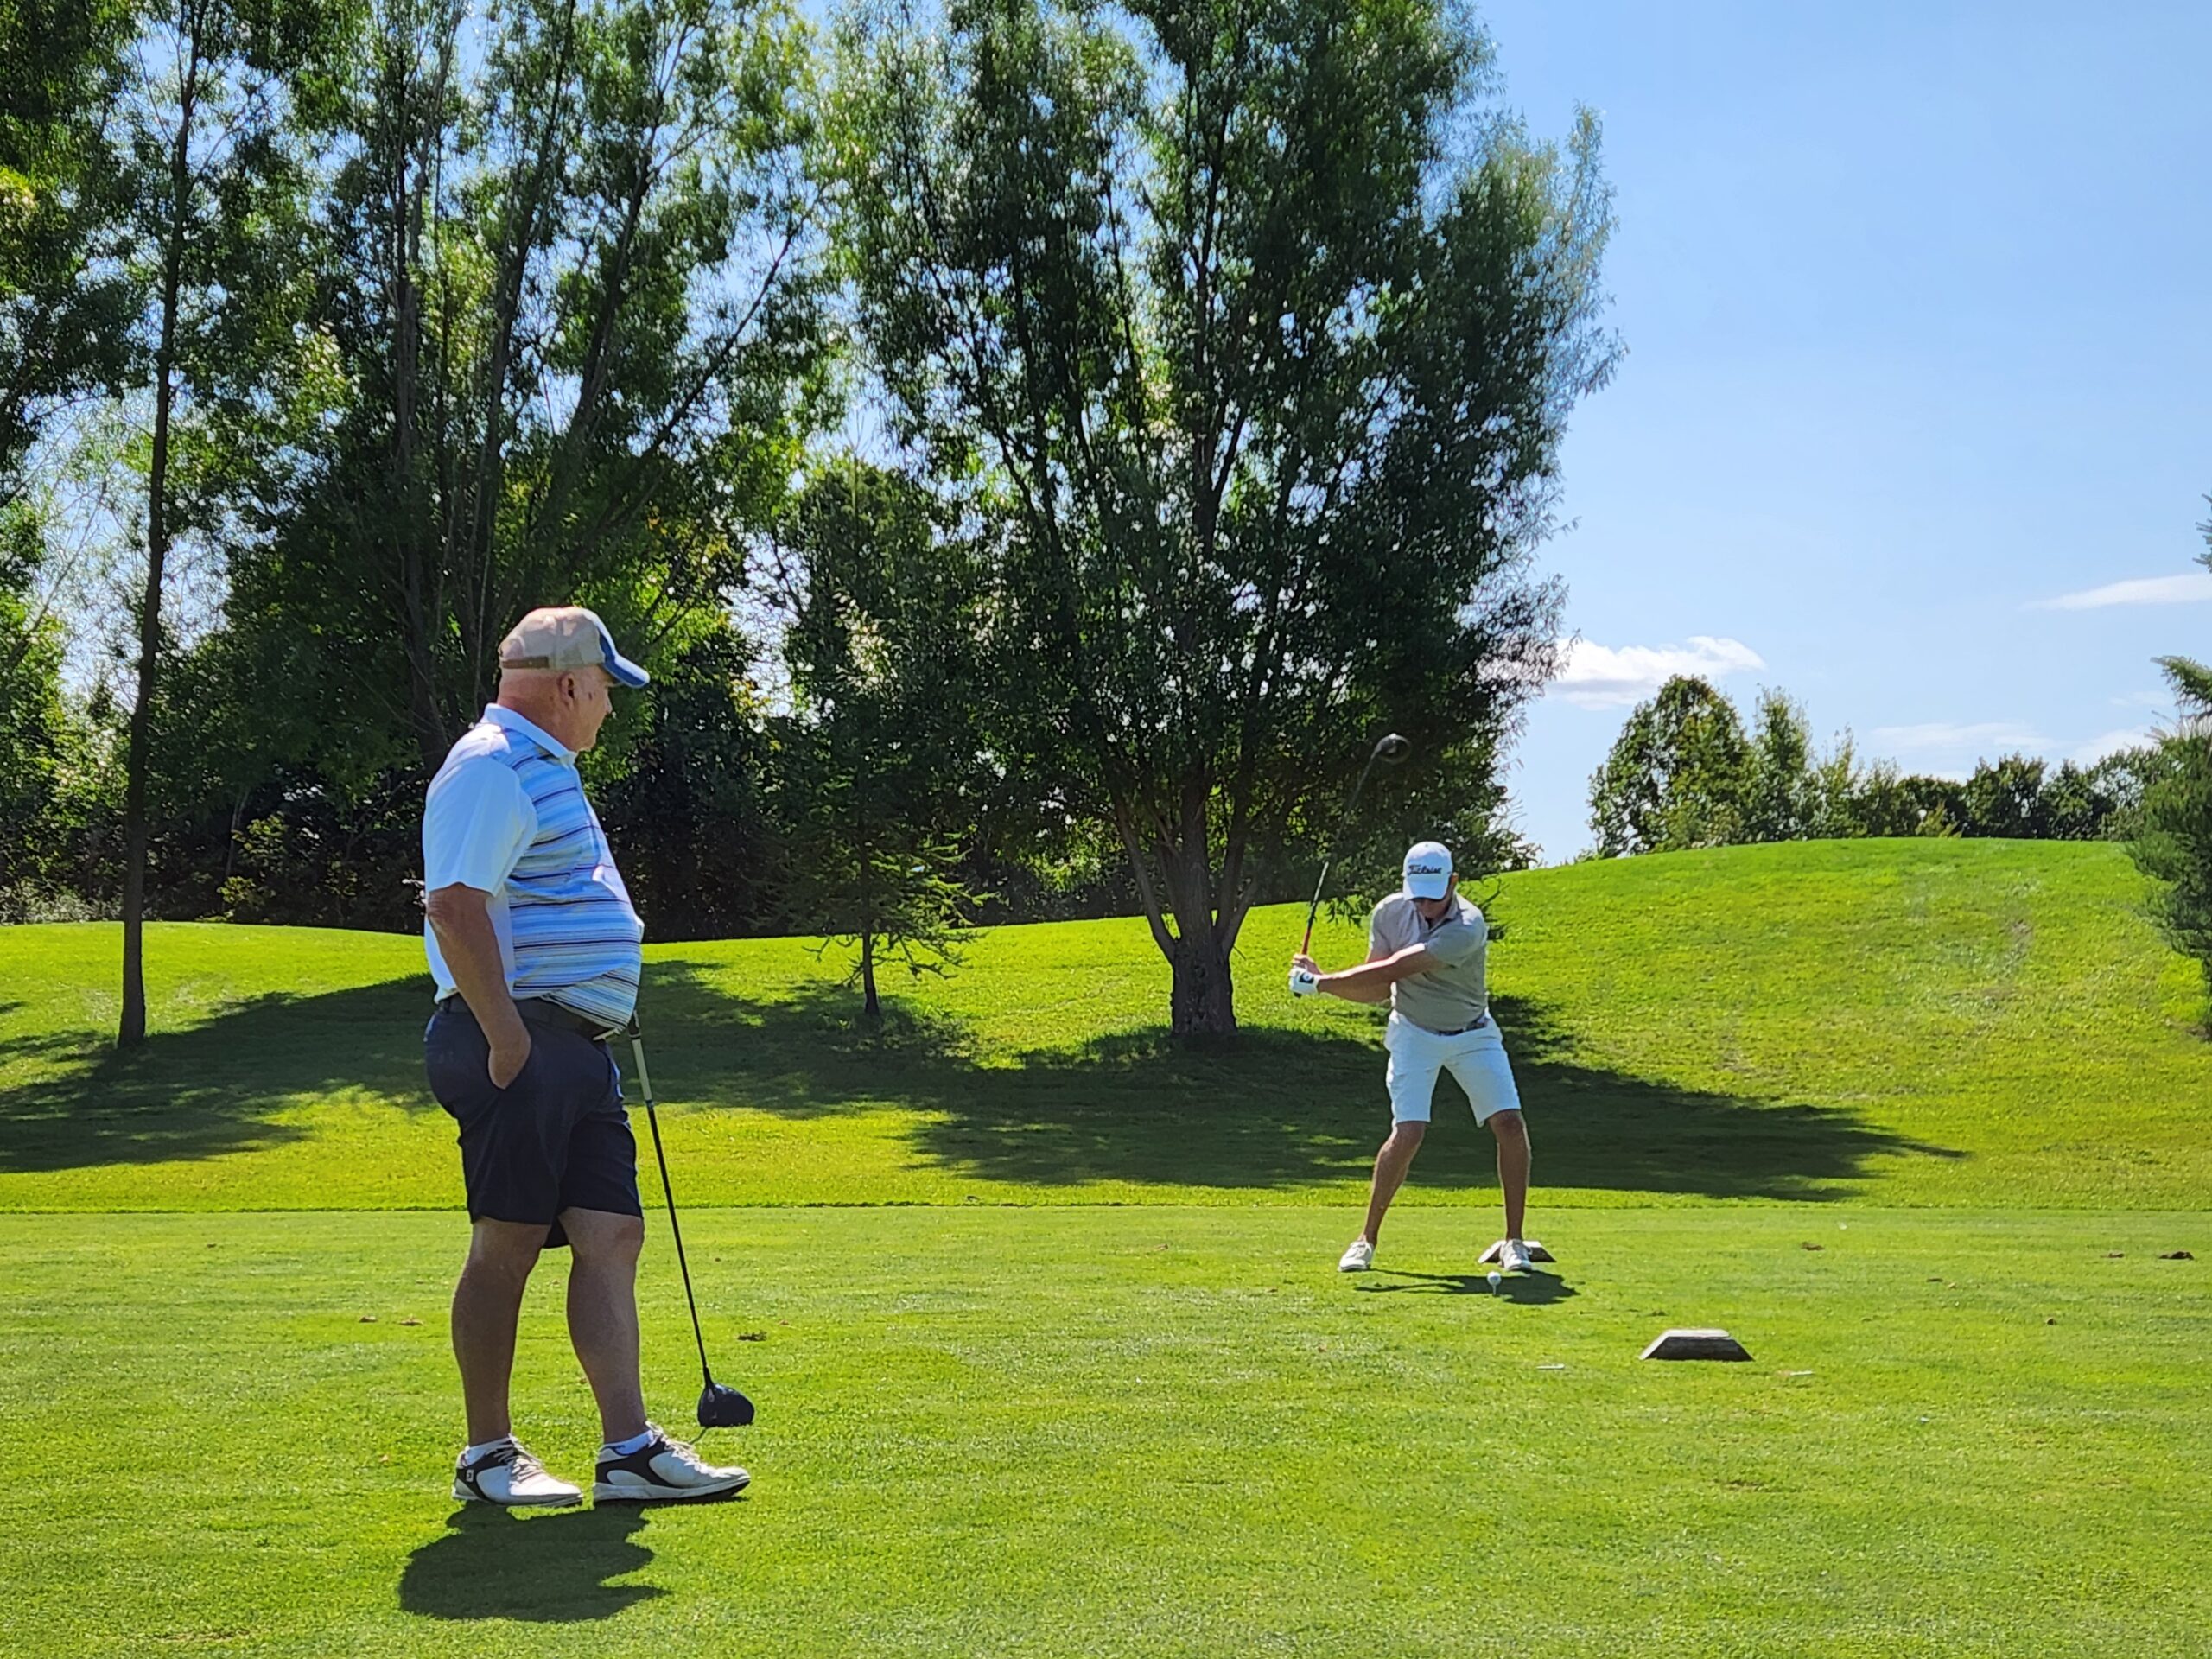 Golfers raise $30,000 to provide essential mental health services